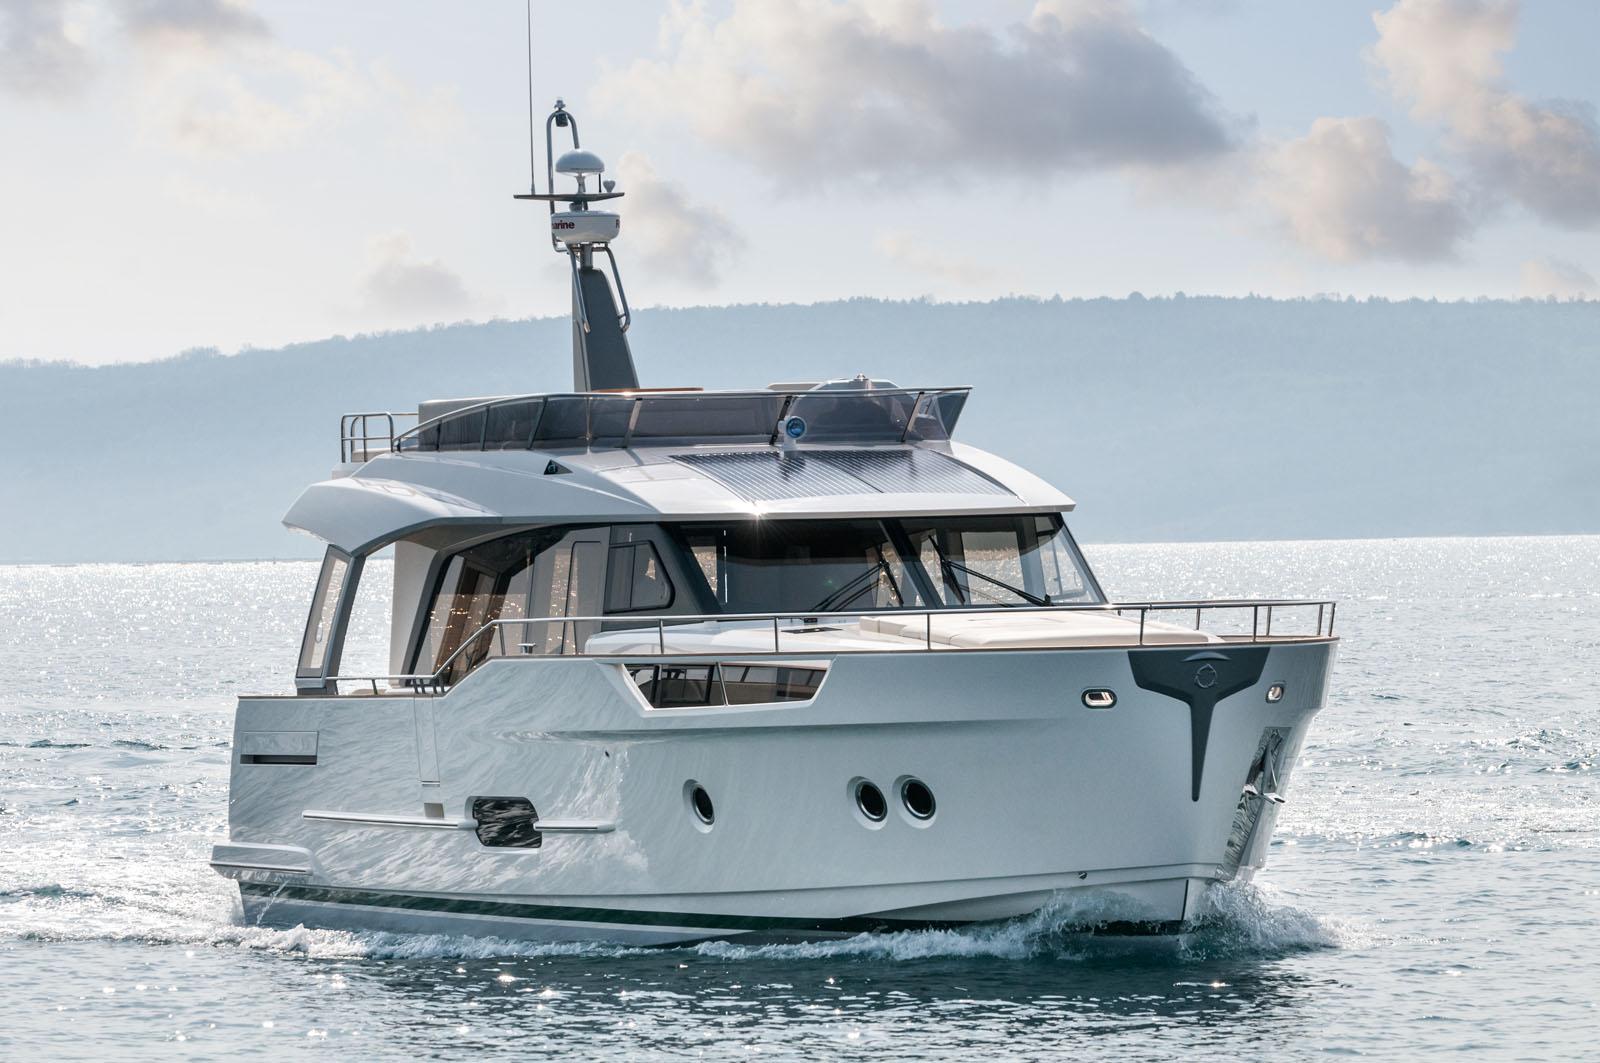 2023 Greenline 48 hull#101 Available Now